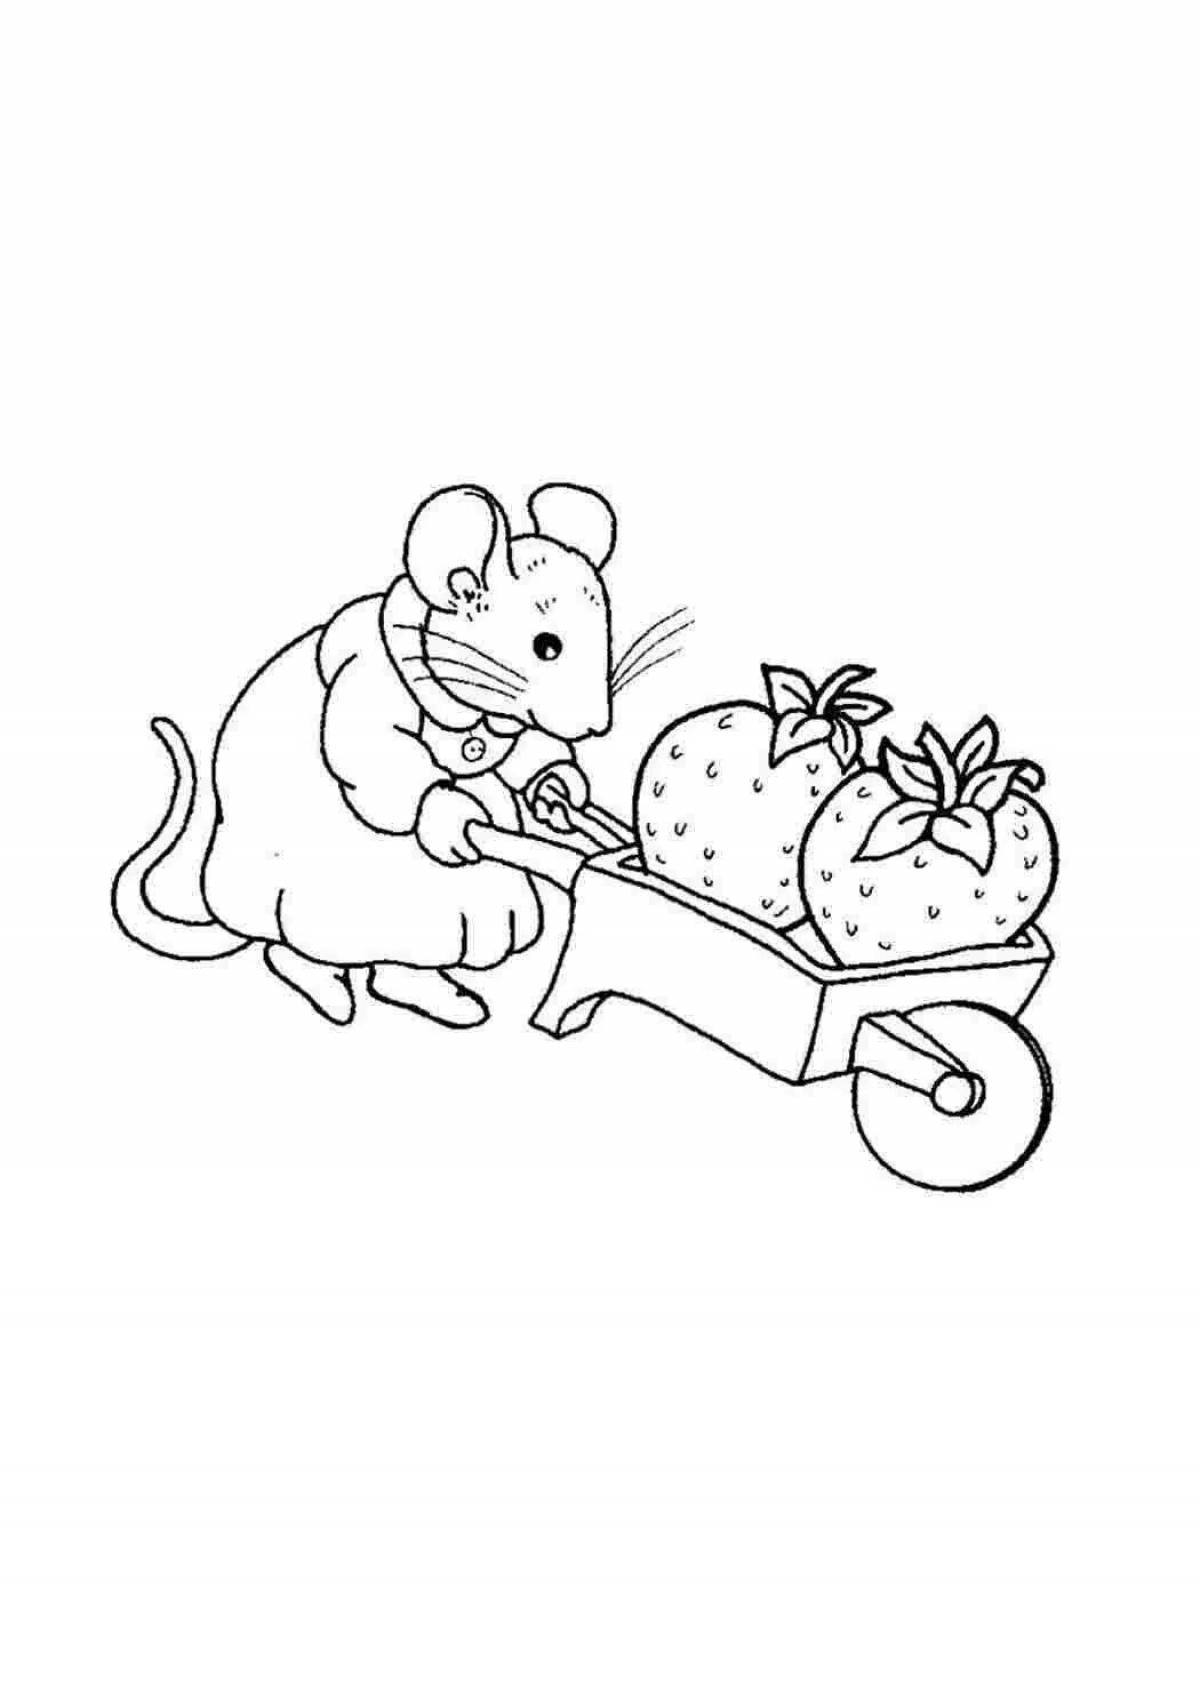 Coloring book funny mouse and bear